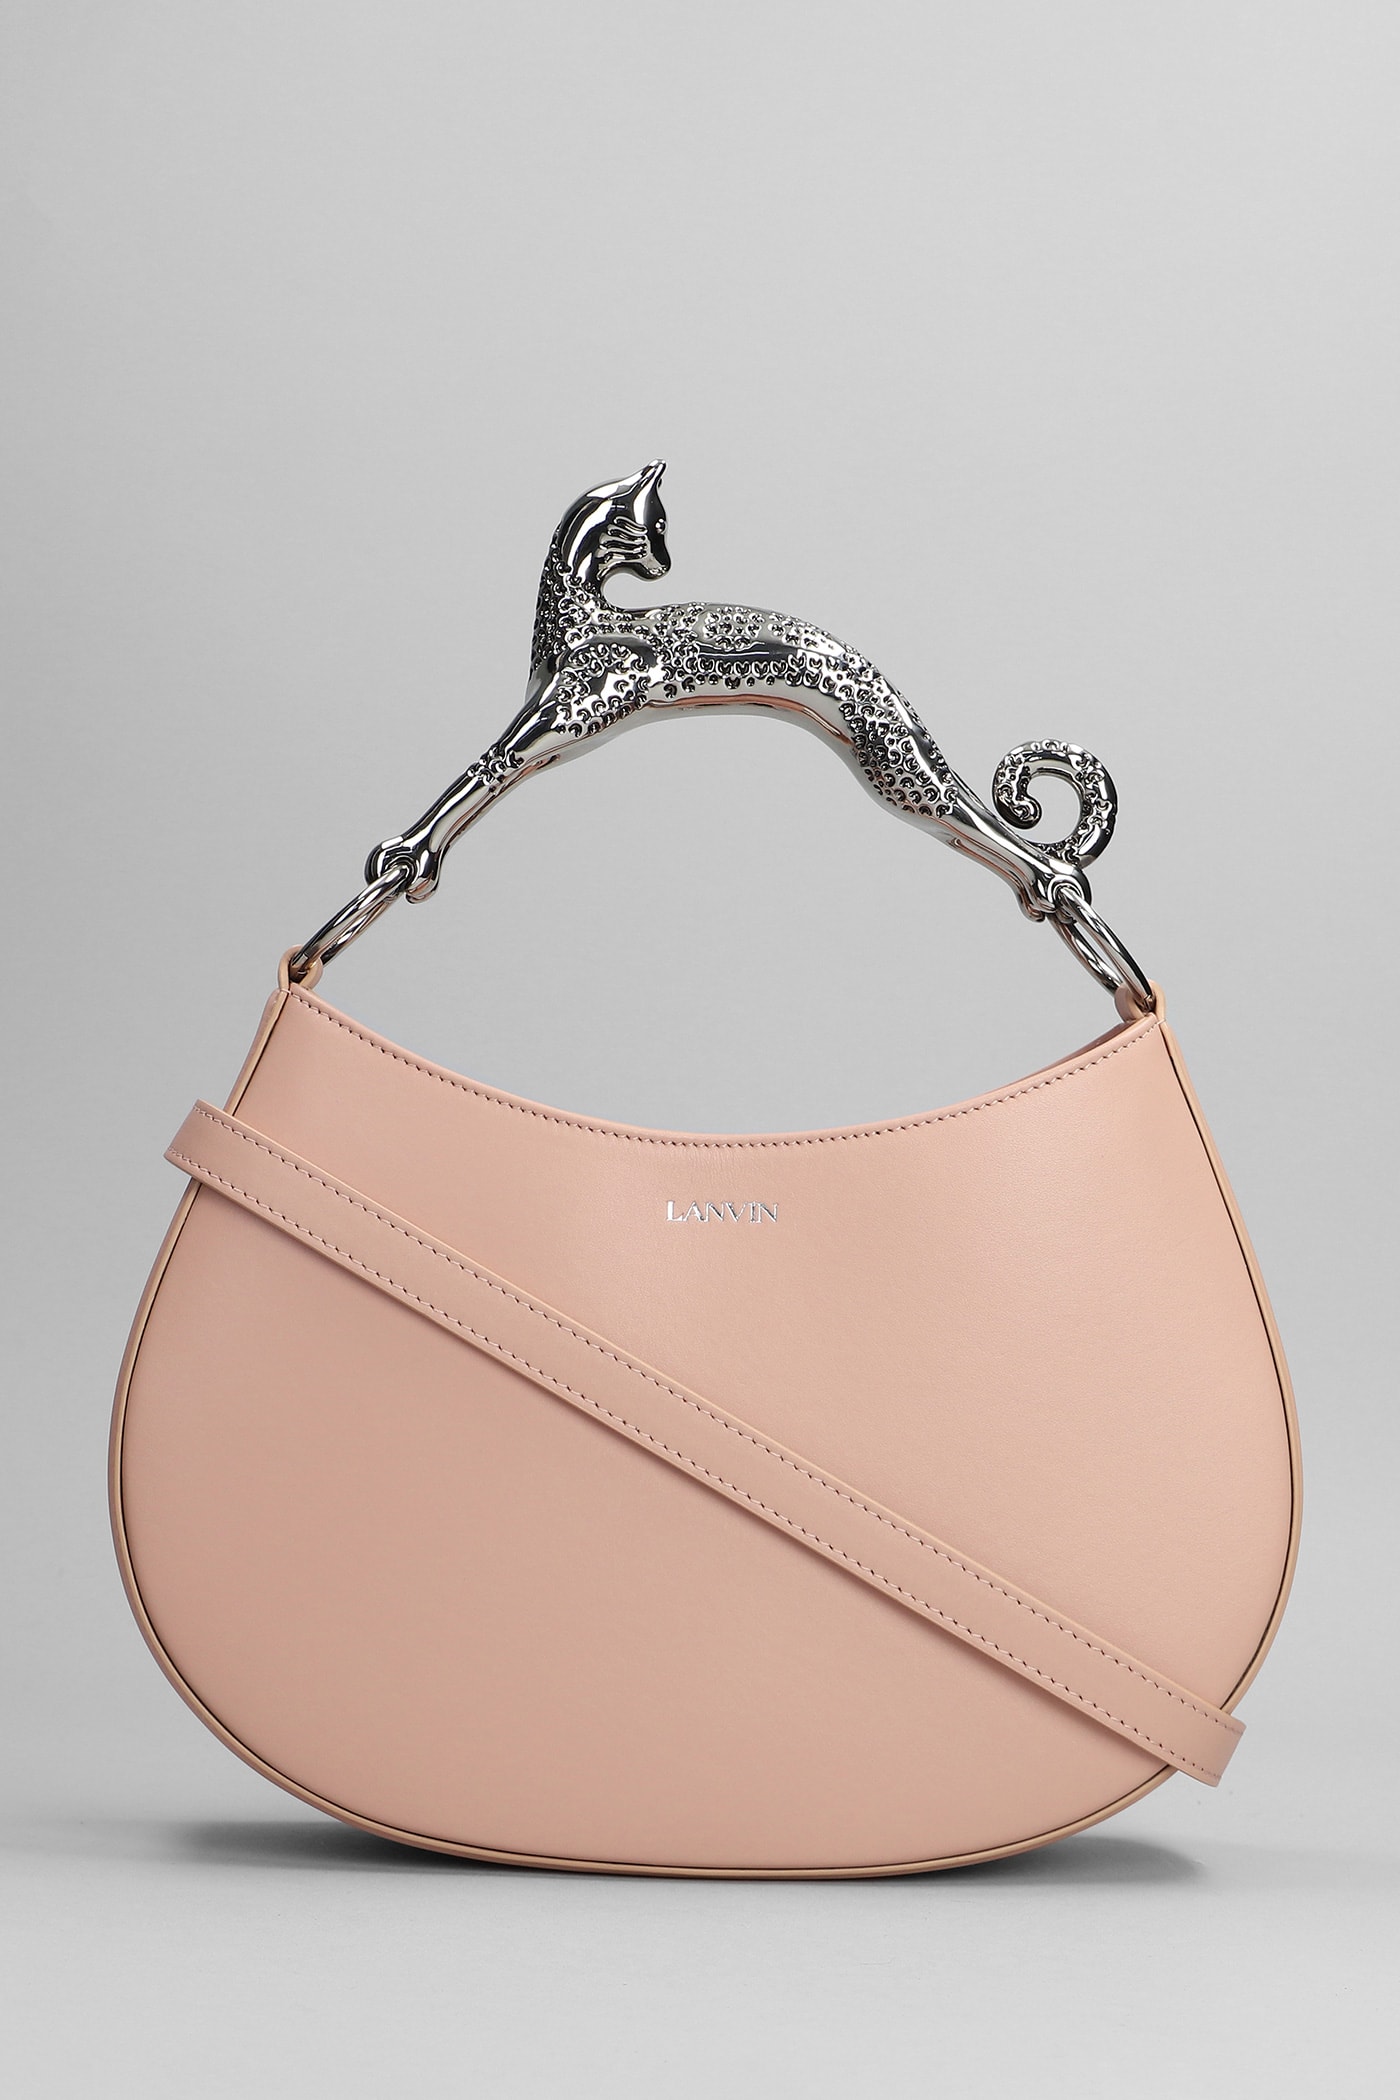 Lanvin Hand Bag In Rose-pink Leather